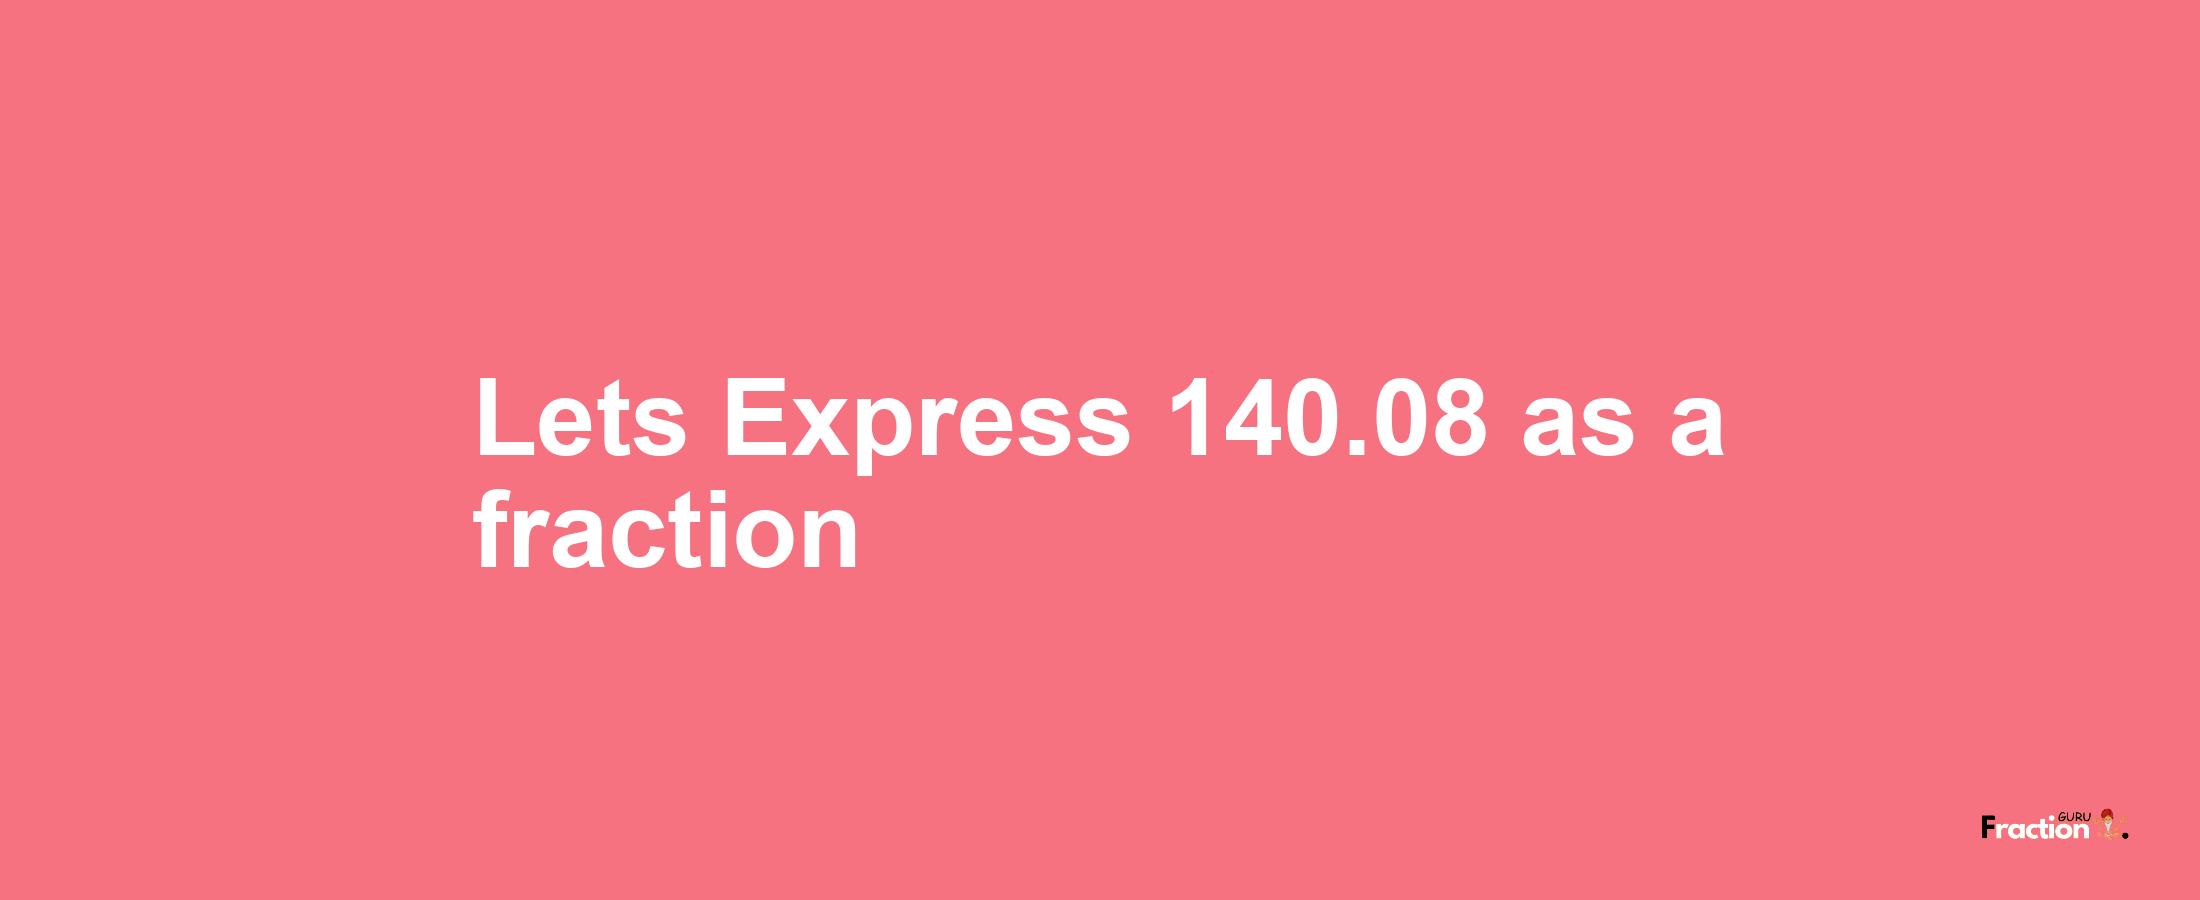 Lets Express 140.08 as afraction